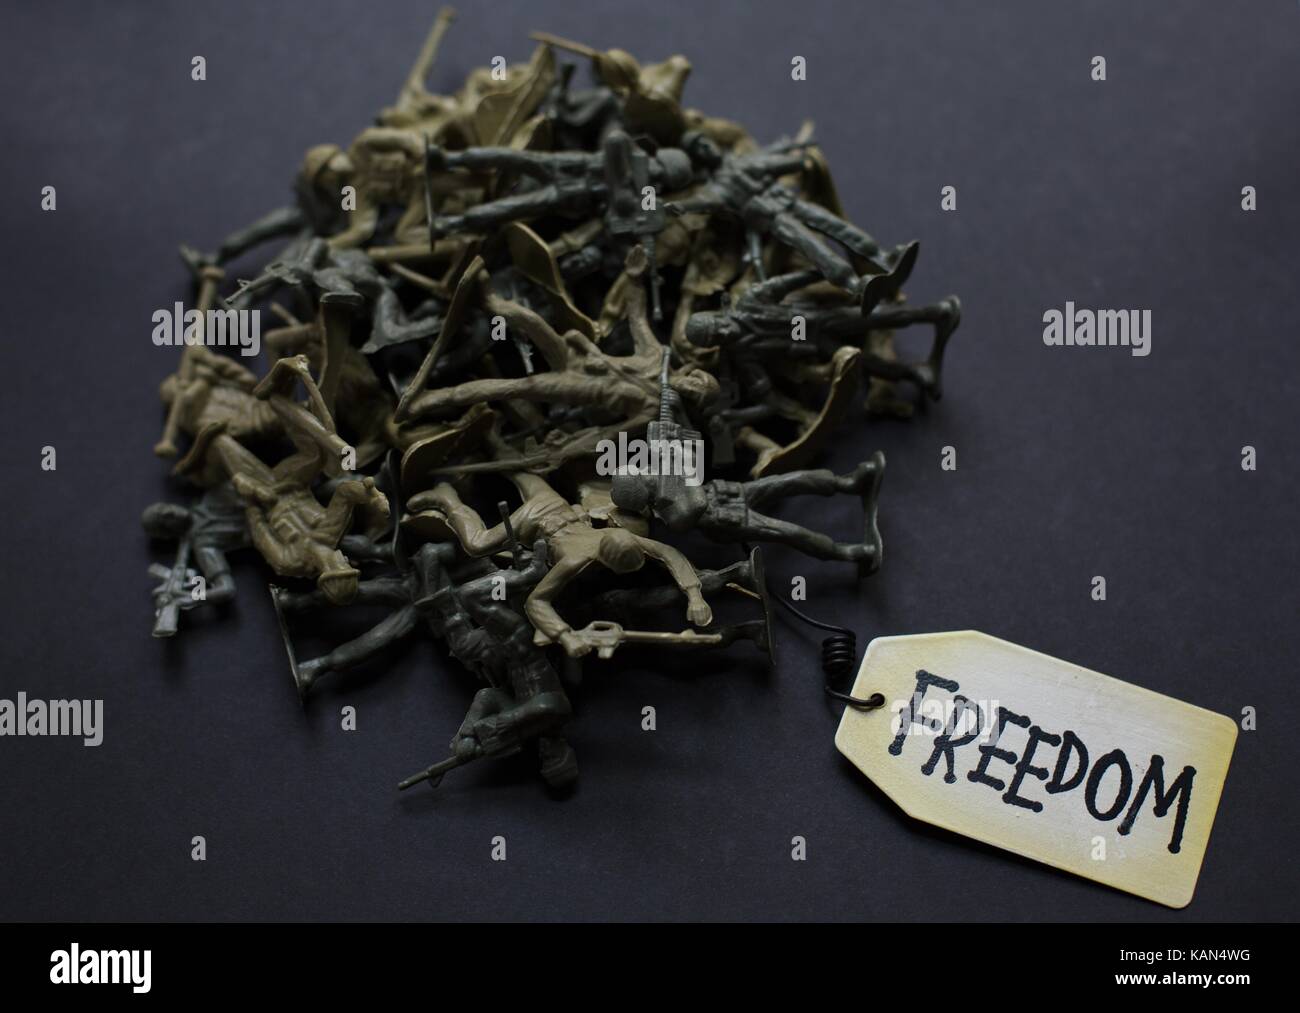 A pile of plastic toy soldiers with a tag that reads 'freedom'. Stock Photo